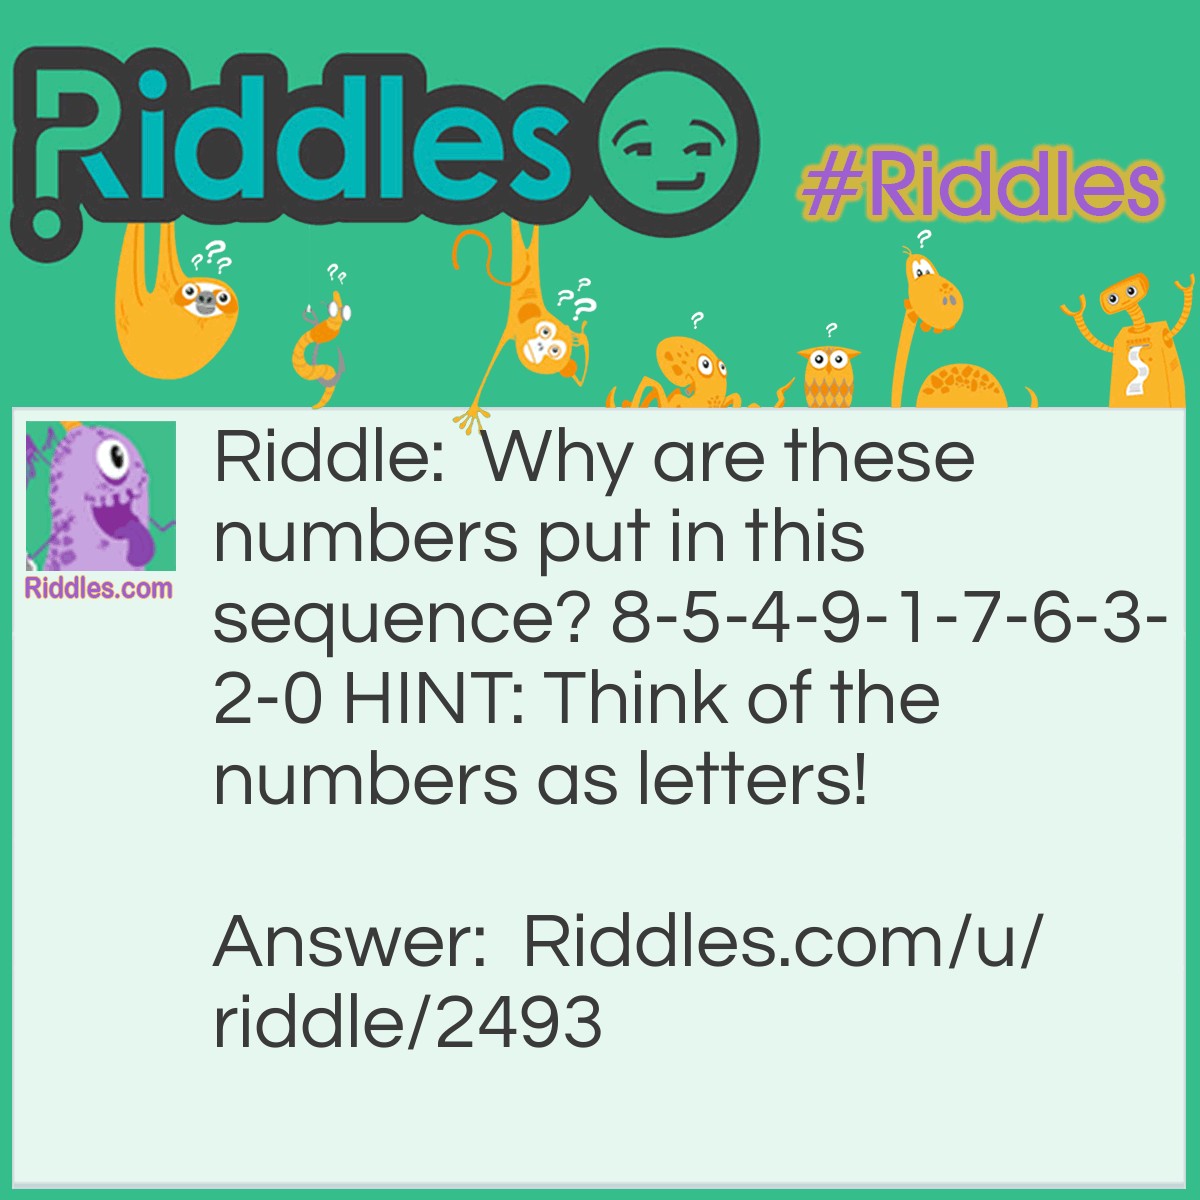 Riddle: Why are these numbers put in this sequence? 8-5-4-9-1-7-6-3-2-0 HINT: Think of the numbers as letters! Answer: They are in ABC order!